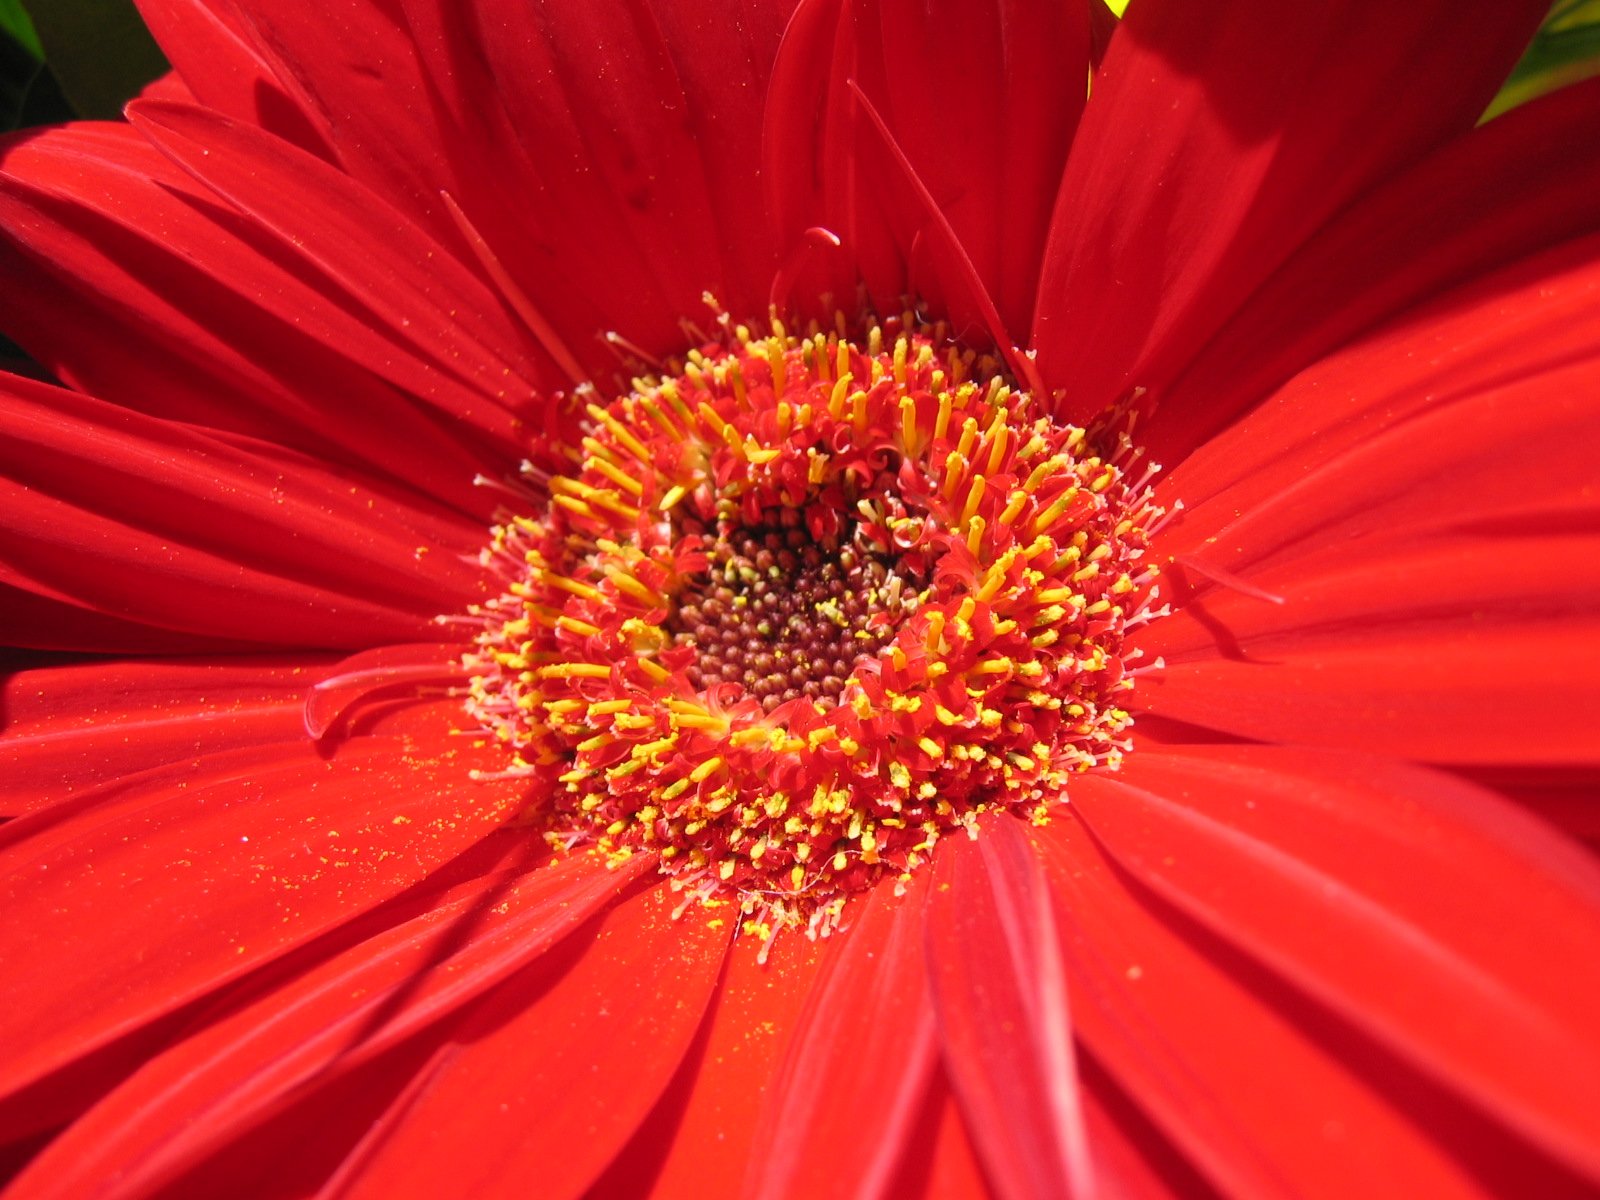 the bright red flower has a bug in it's center